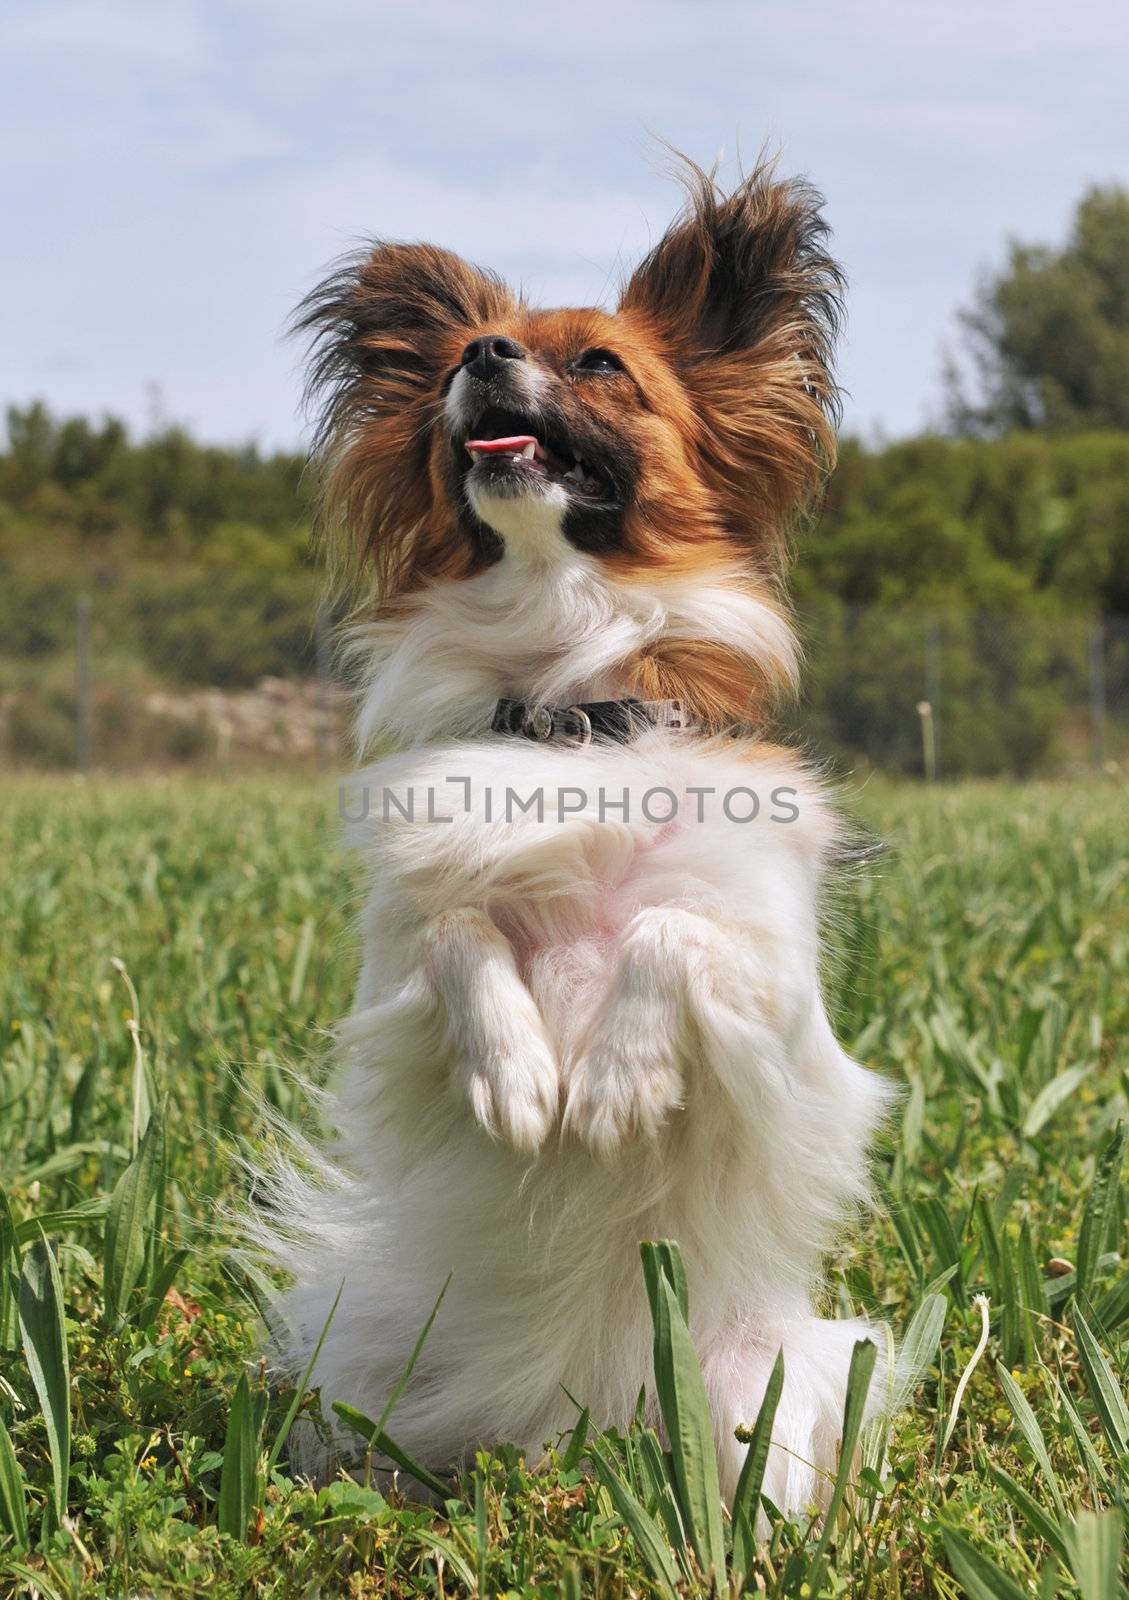 portrait of a purebred papillon dog sitting in a field